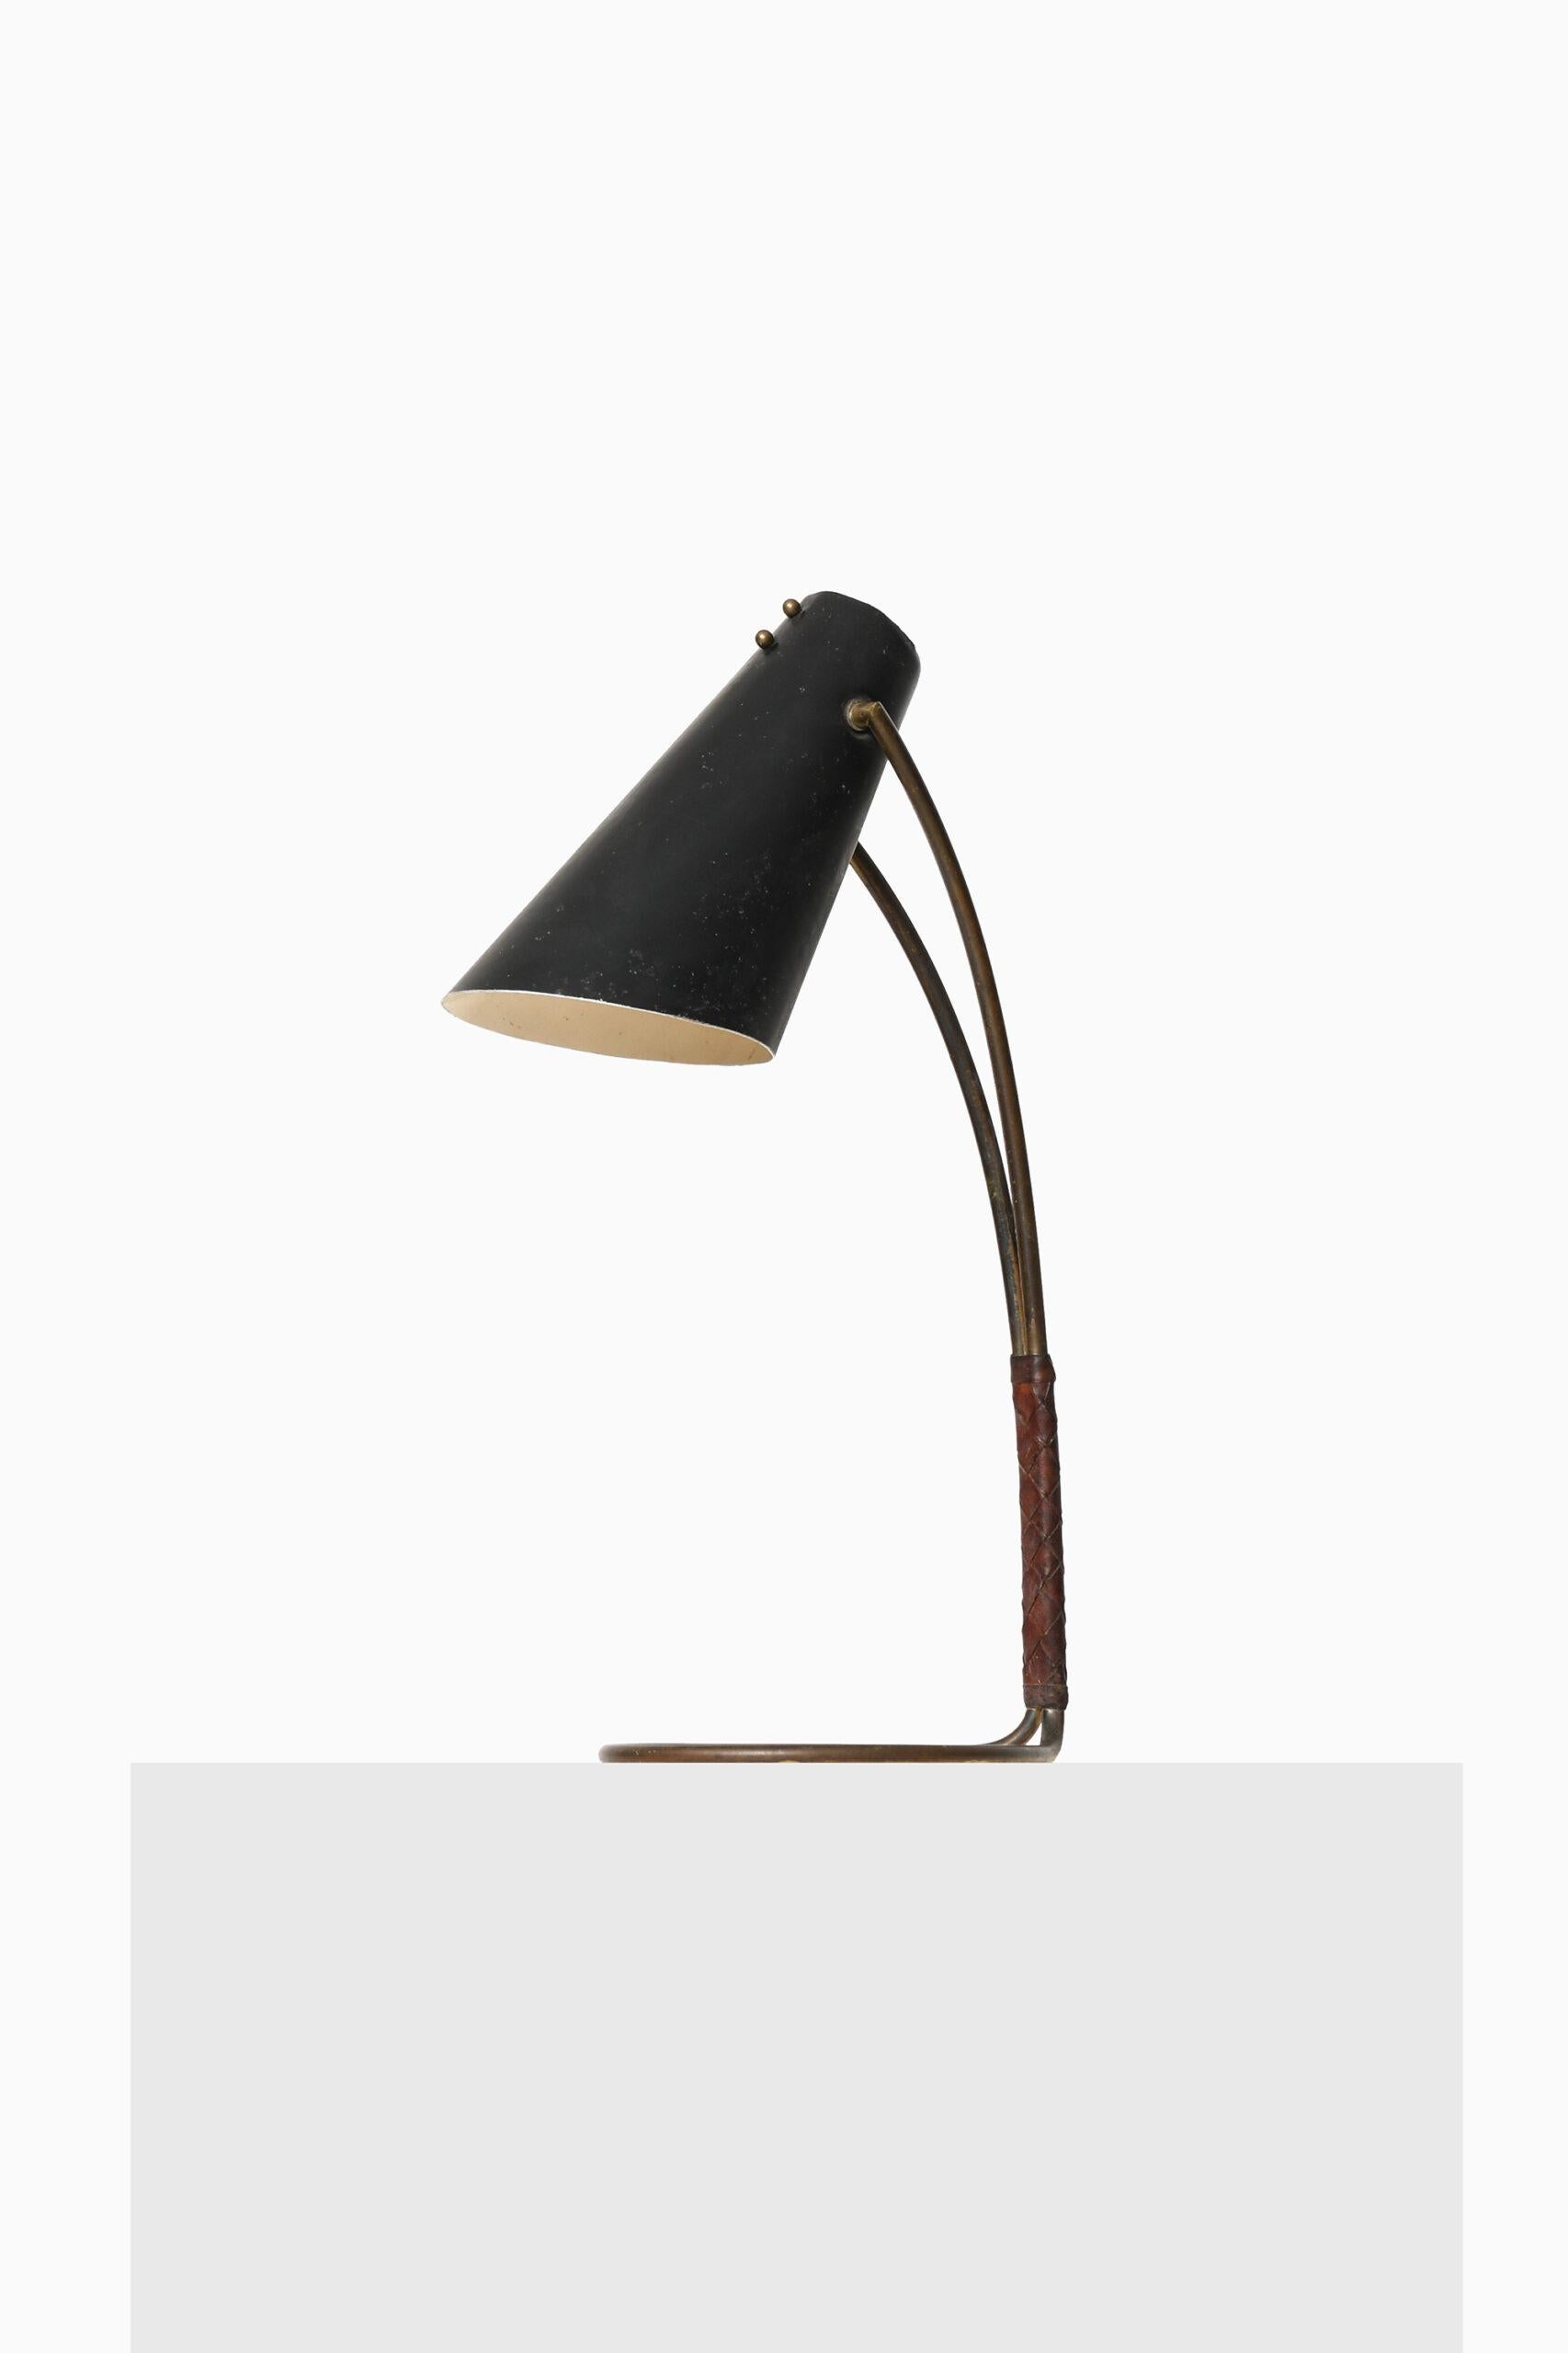 Mid-20th Century Svend Aage Holm Sørensen Table Lamp Produced by Holm Sørensen & Co in Denmark